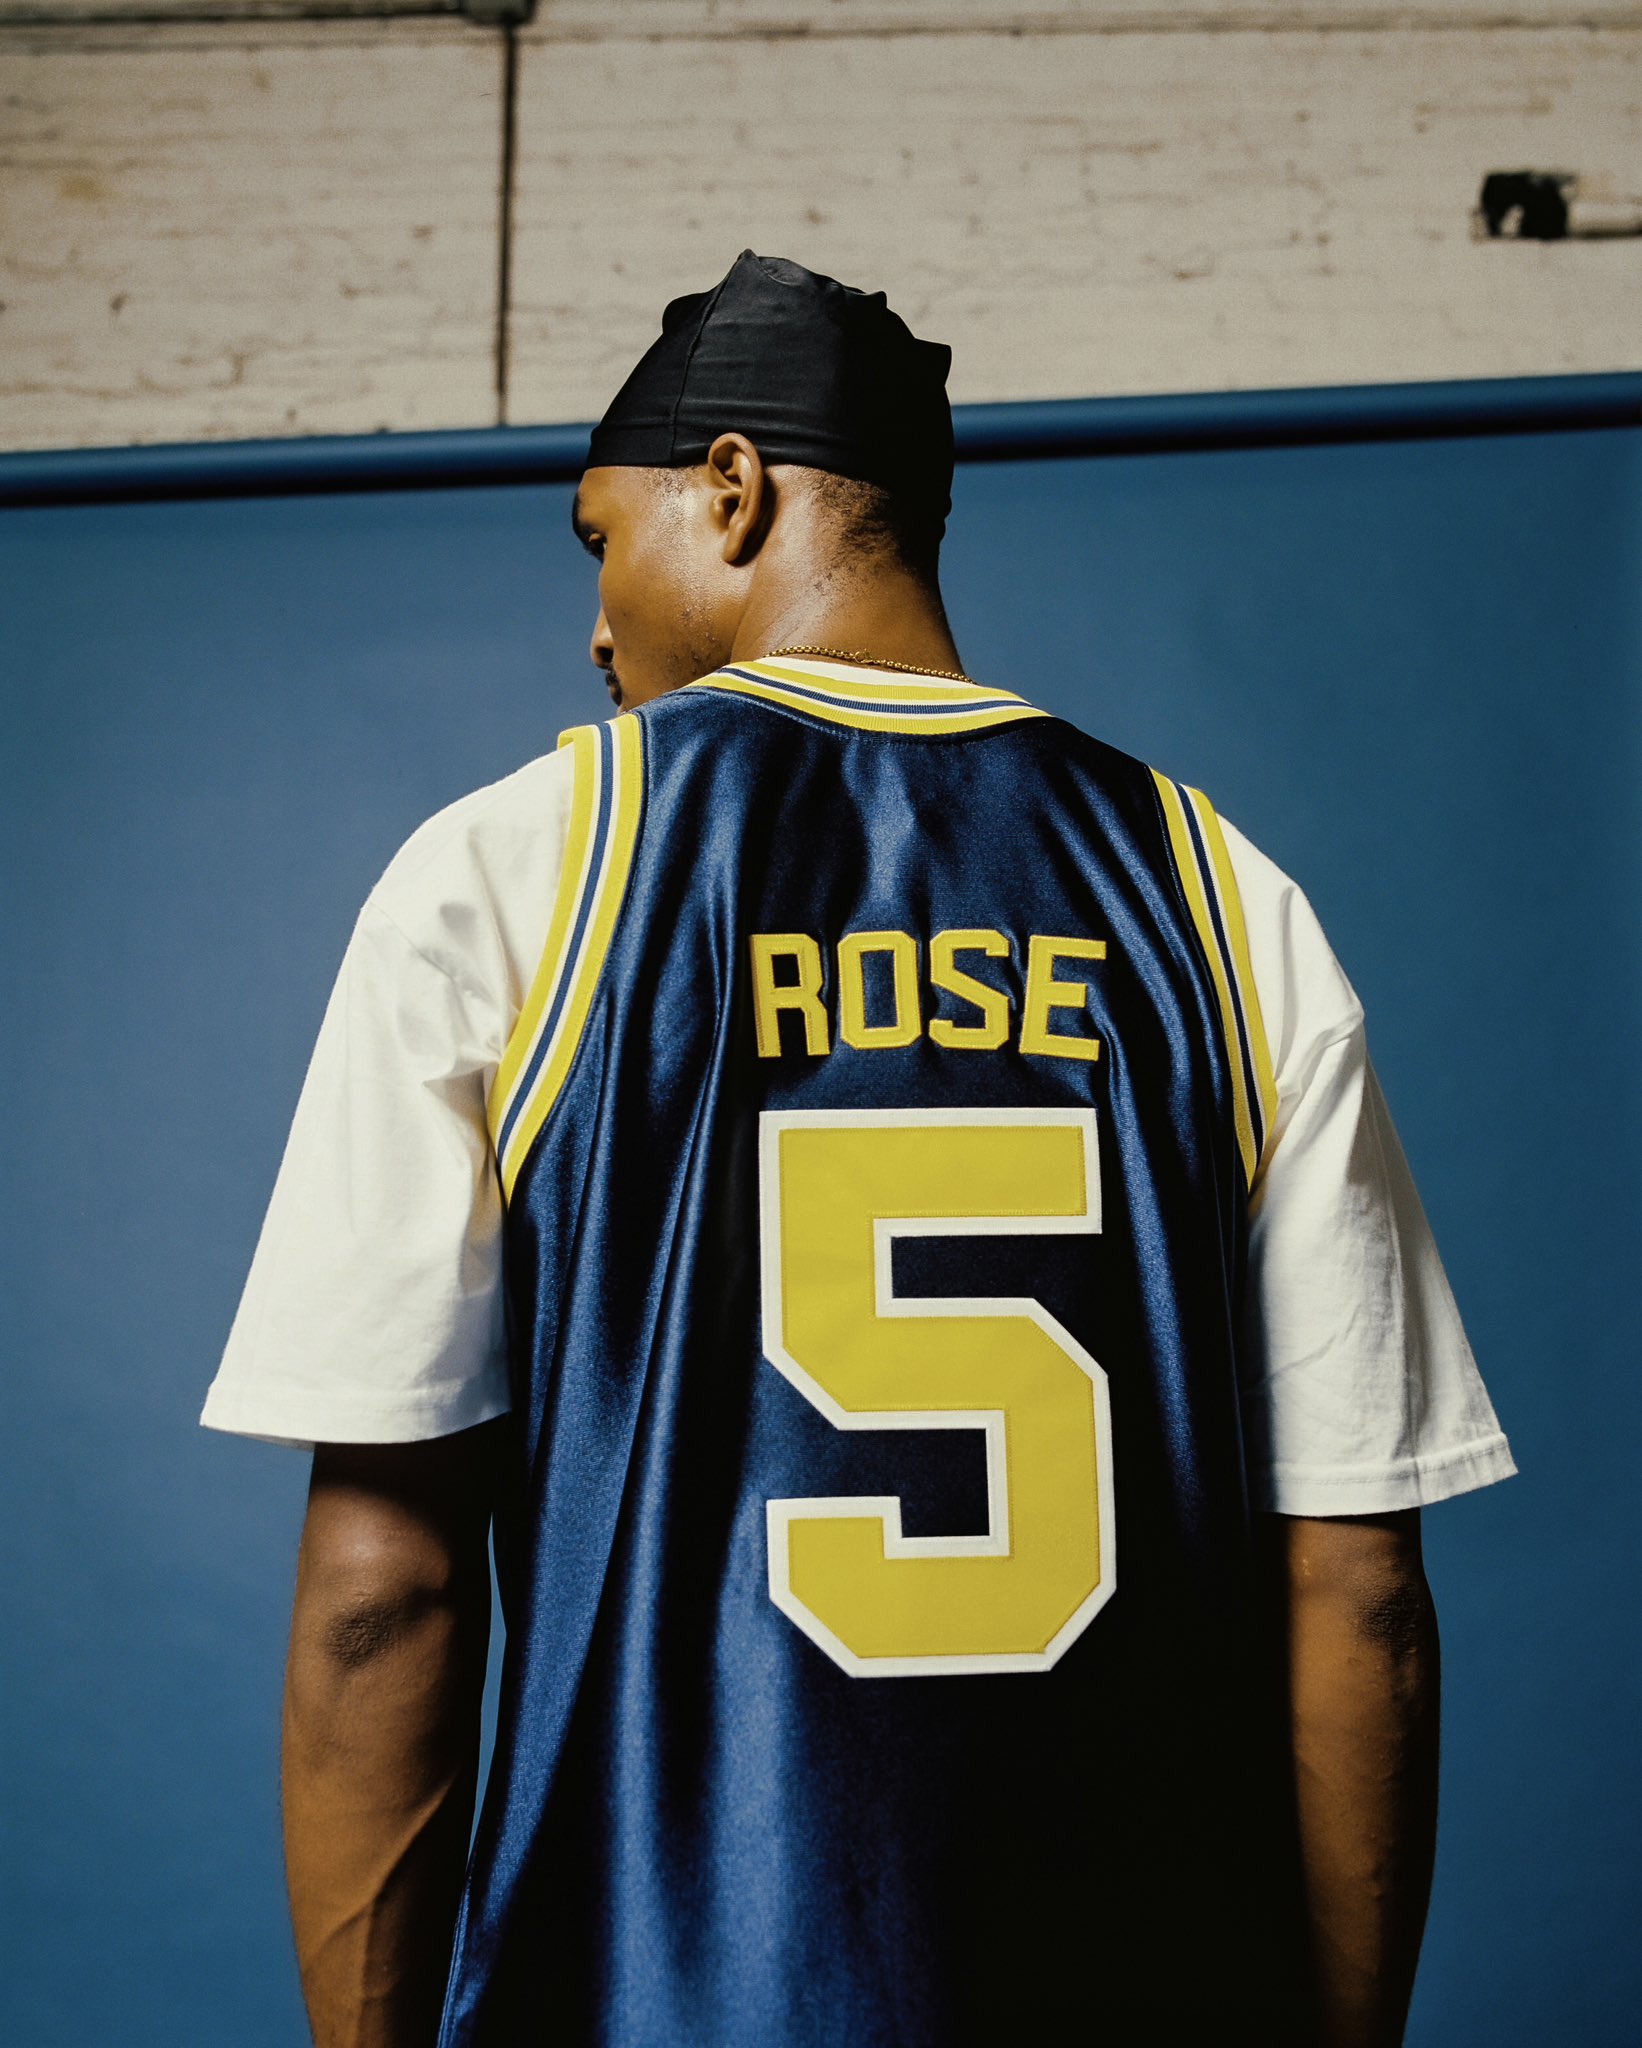 M&N x Just Don Collection  Mitchell & Ness Nostalgia Co.